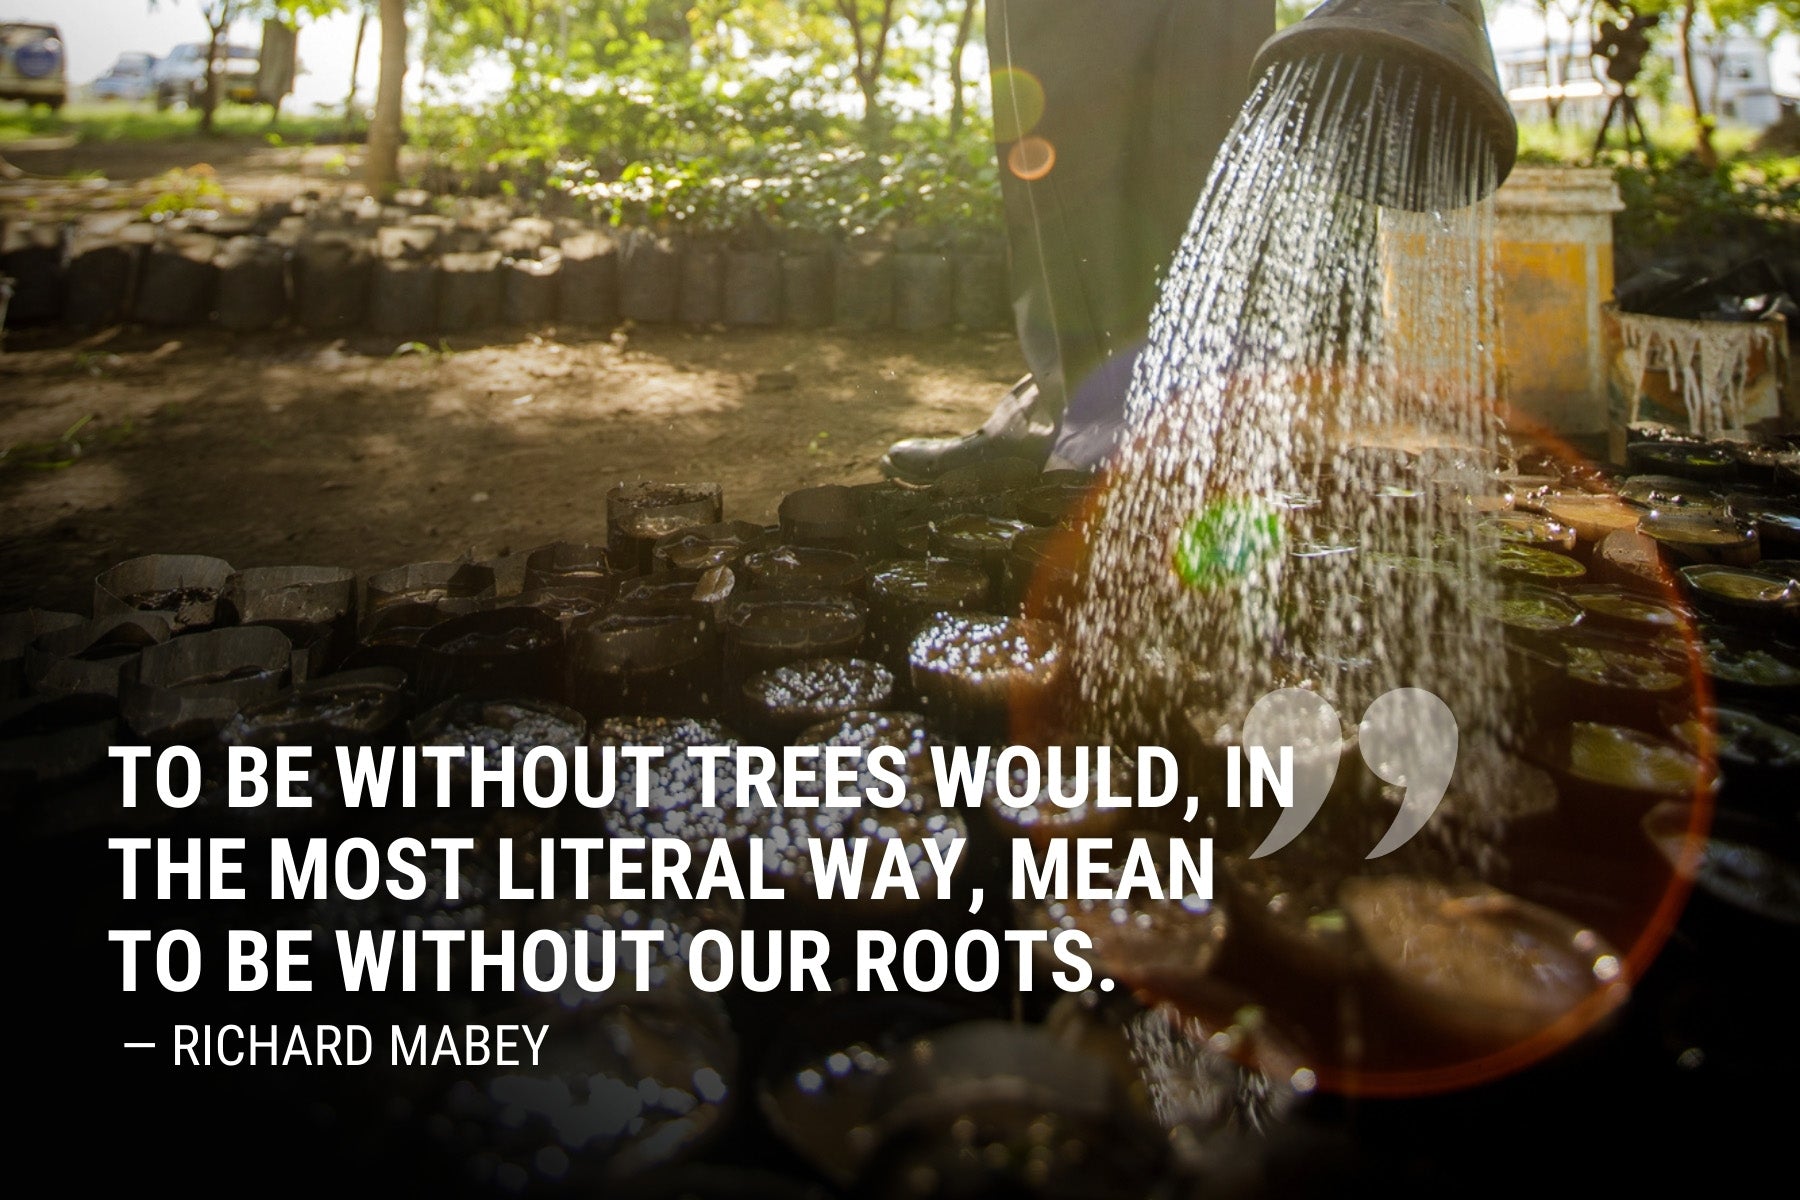 Inspirational Quotes About Trees - One Tree Planted